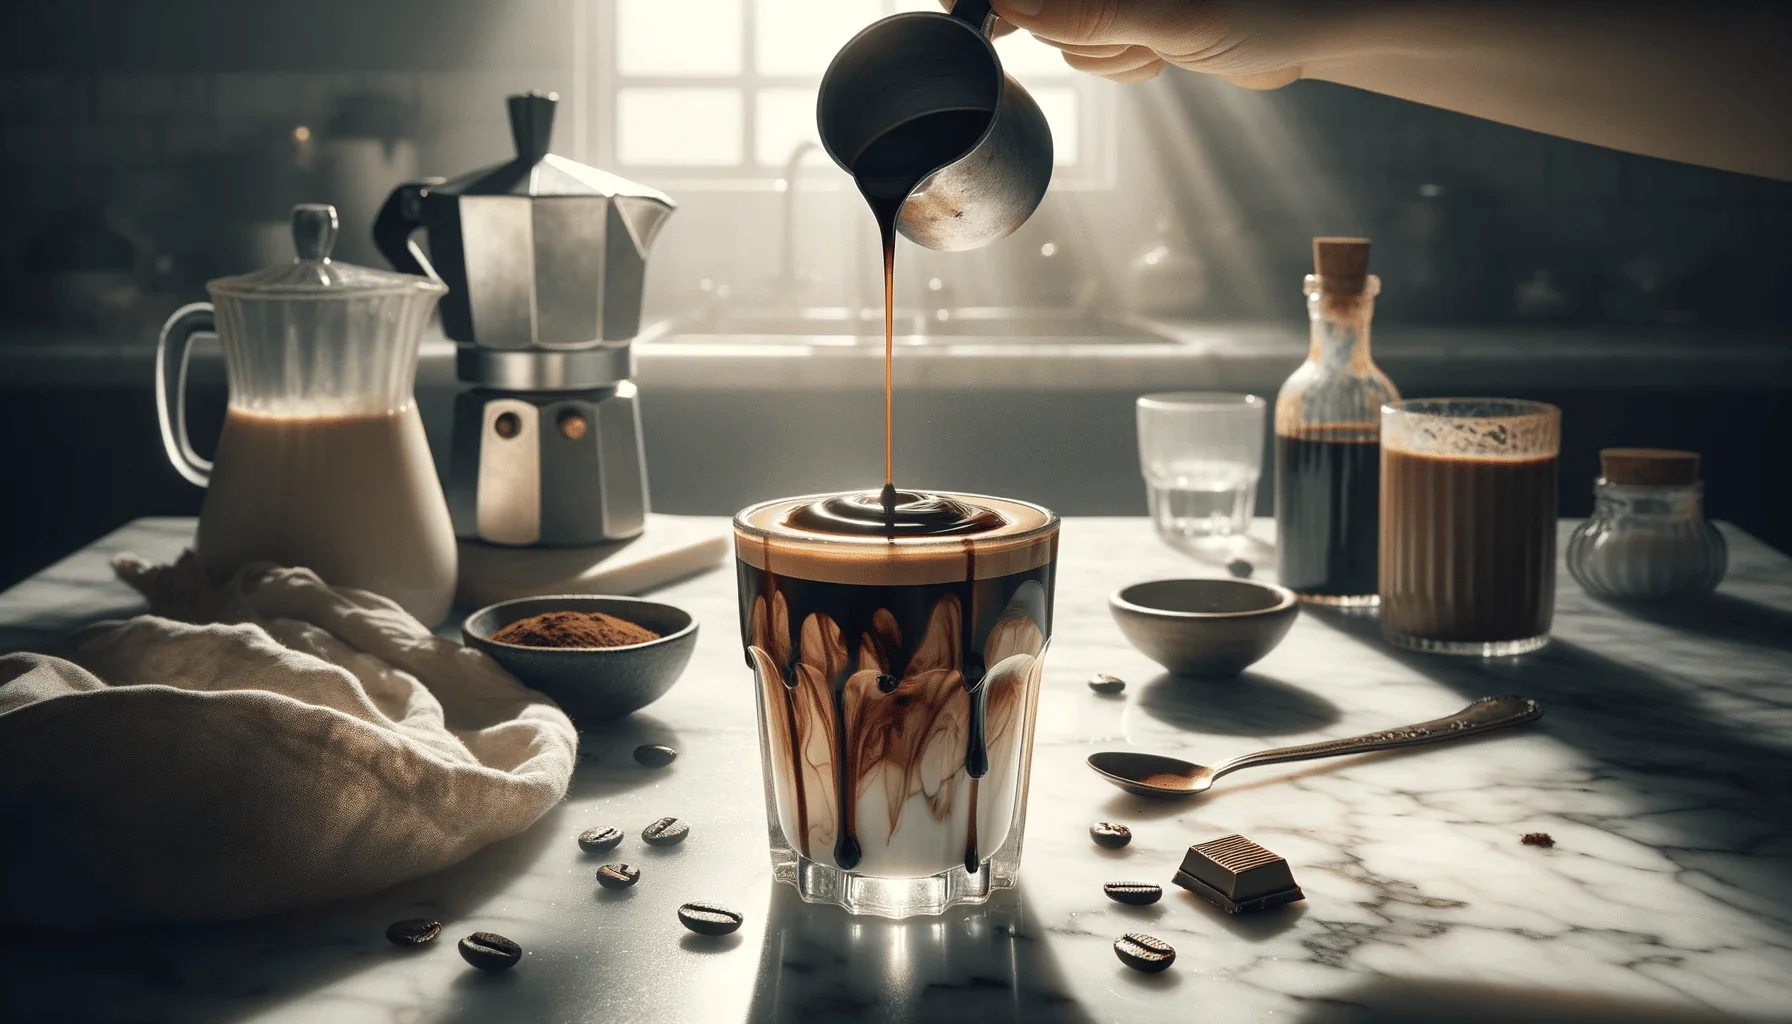 A hand pours dark, rich chocolate syrup into a glass of iced mocha coffee, creating intricate patterns as it blends with the milk. The scene is set on a marble countertop, bathed in the warm glow of sunlight, with coffee-related items like a coffee pot, milk jug, and pieces of chocolate.